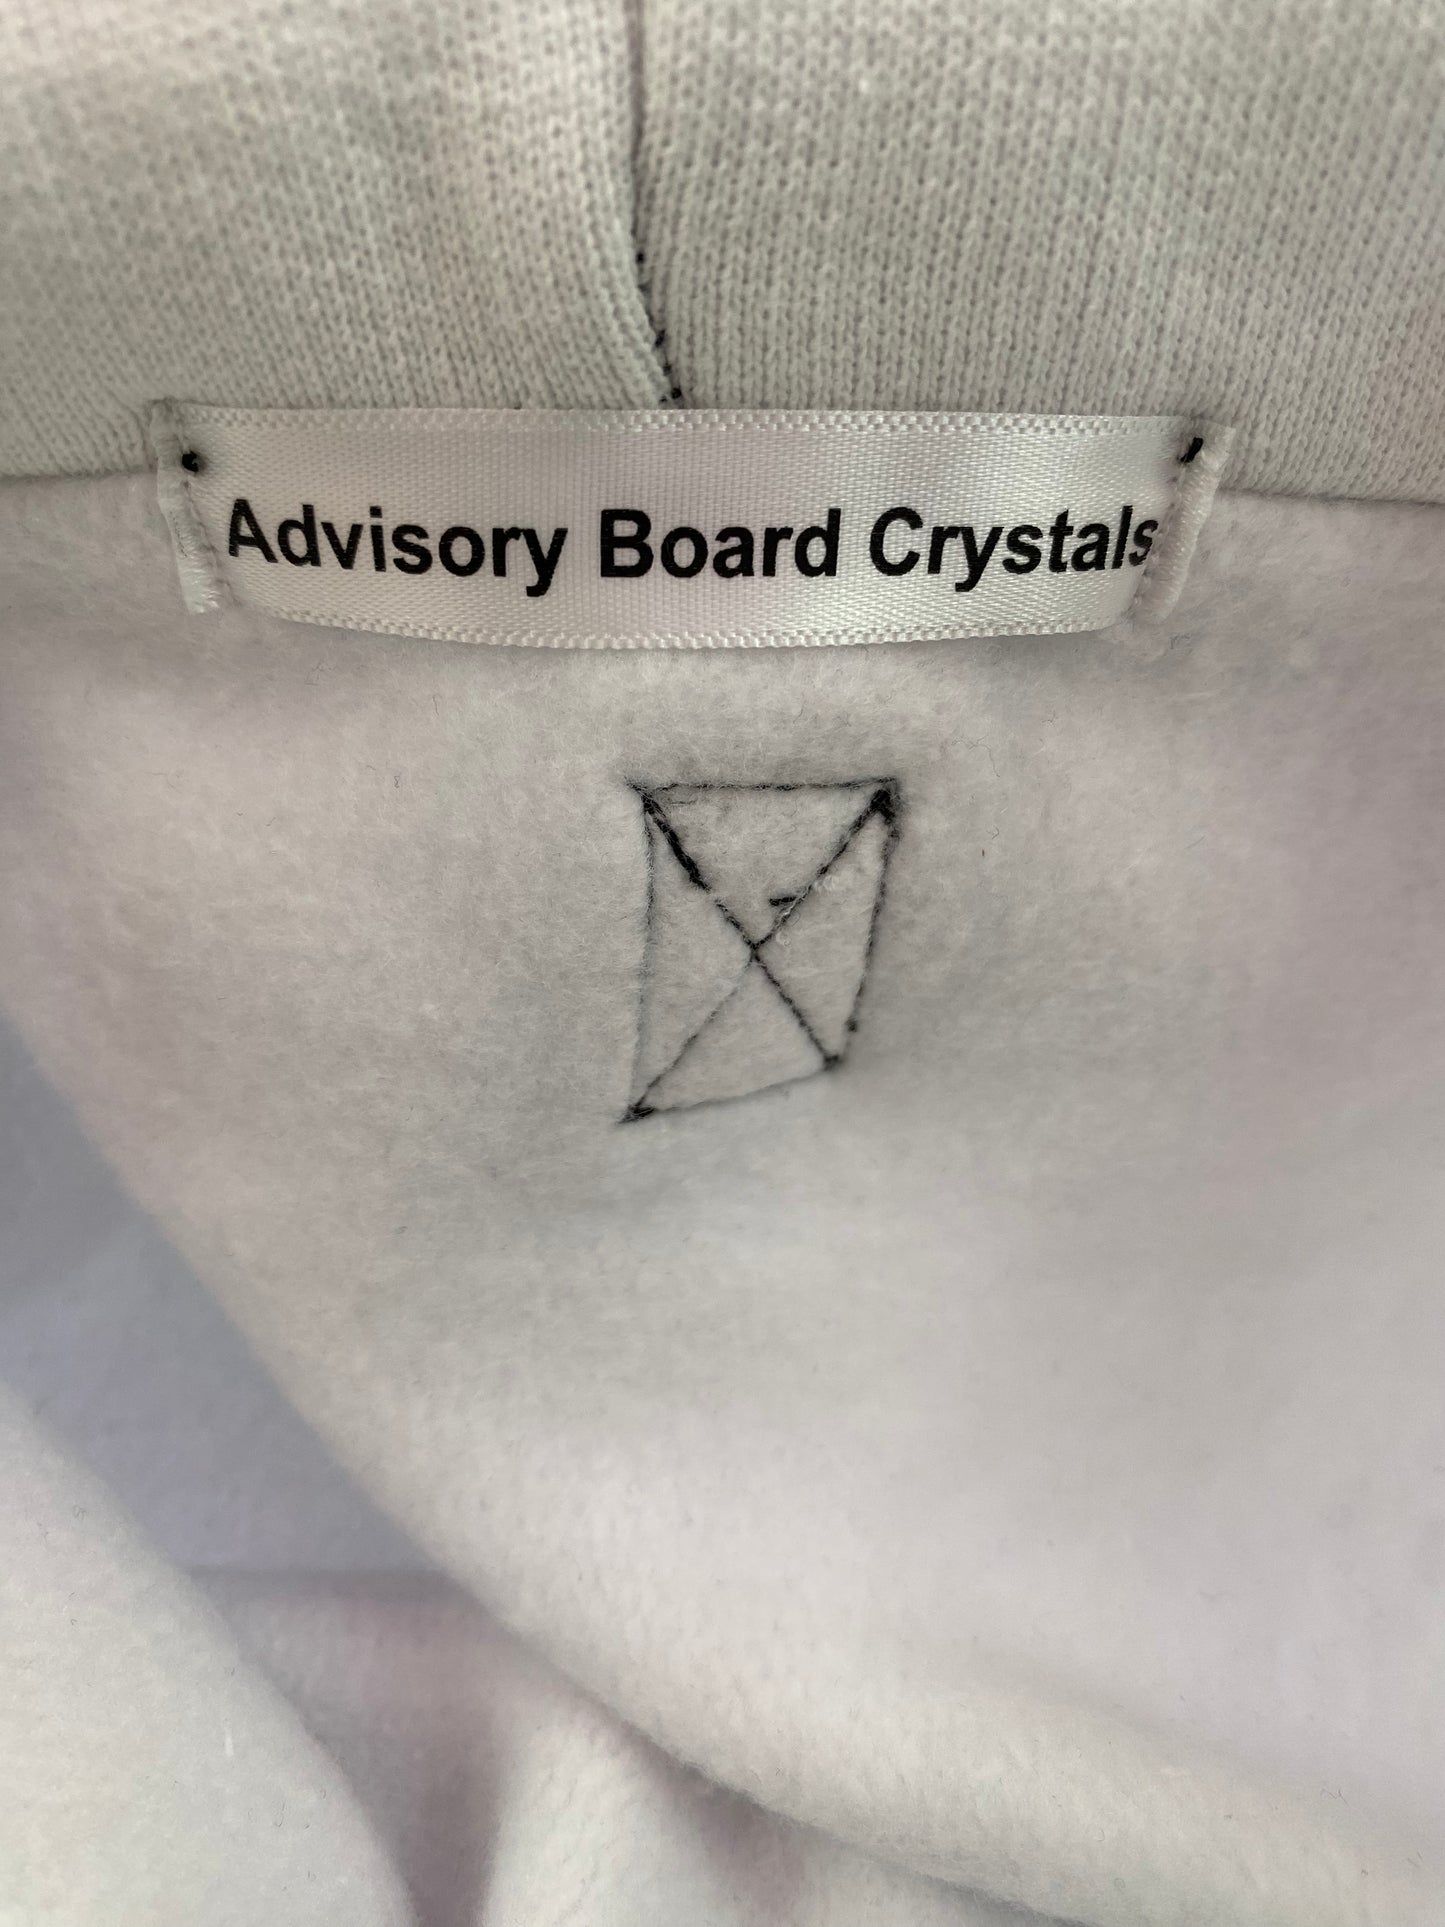 Advisory Board Crystals Planet Saving Hoodie x Guess Collab